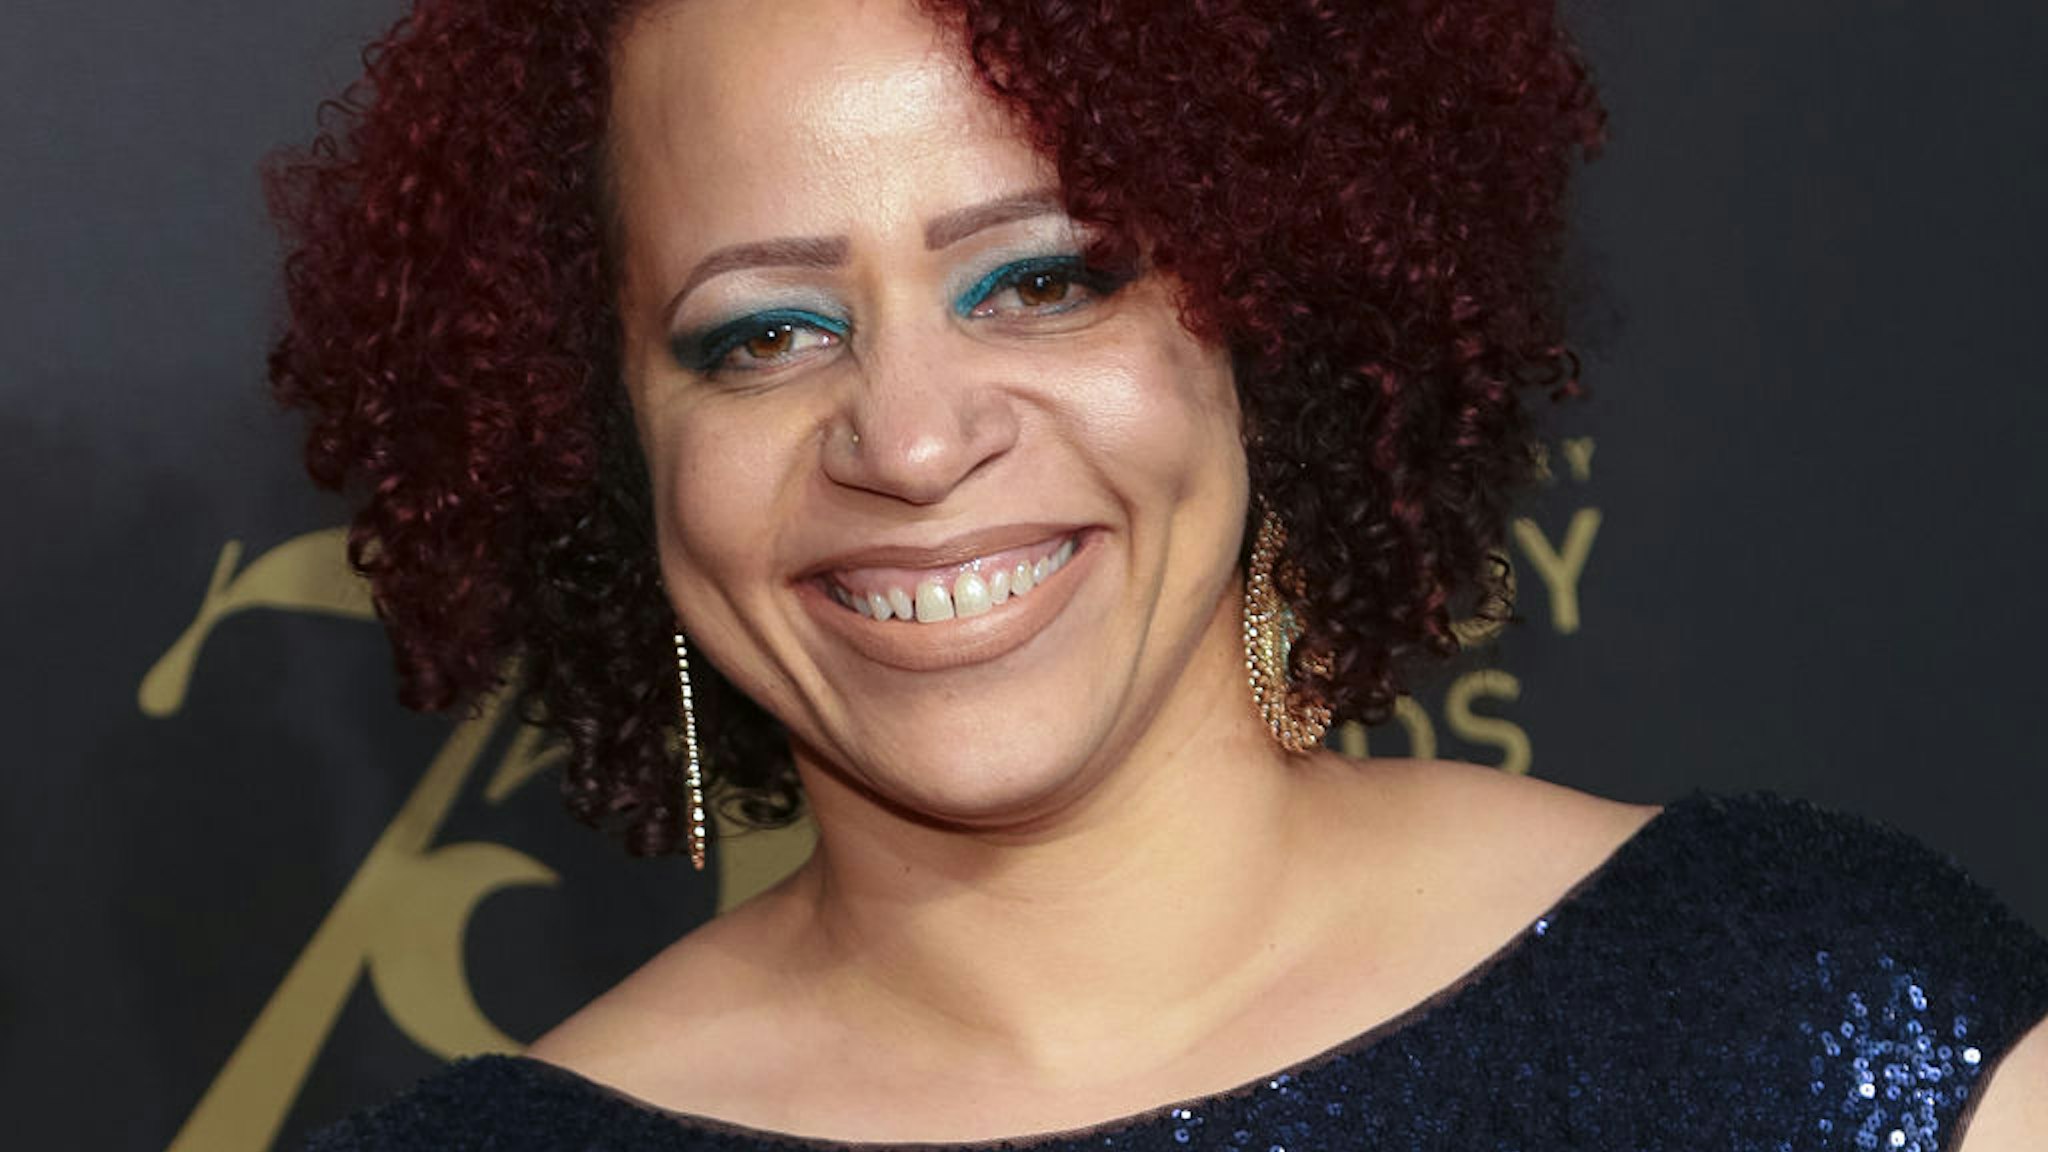 Reporter Nikole Hannah-Jones attends the 75th Annual Peabody Awards Ceremony held at Cipriani Wall Street on May 21, 2016 in New York City.